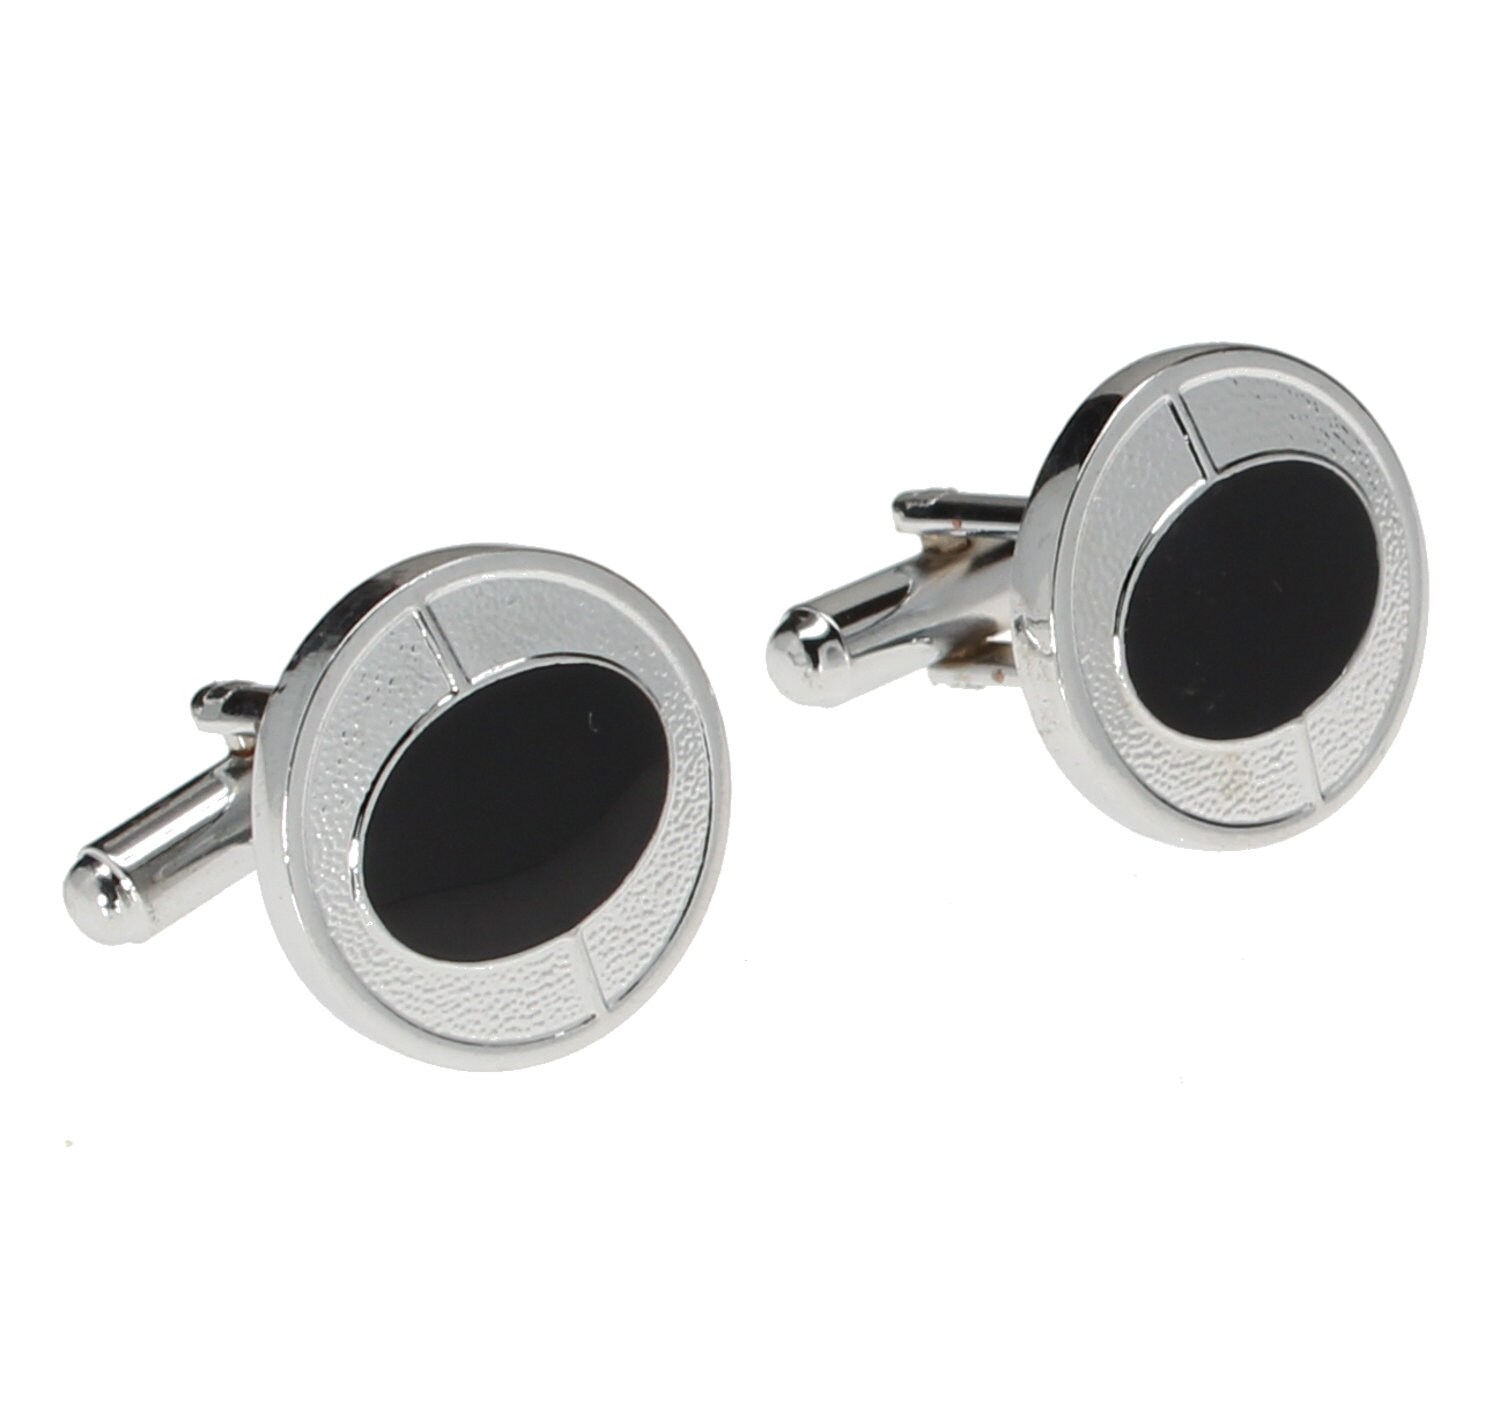 Classic Oval Cuff Links in Silver